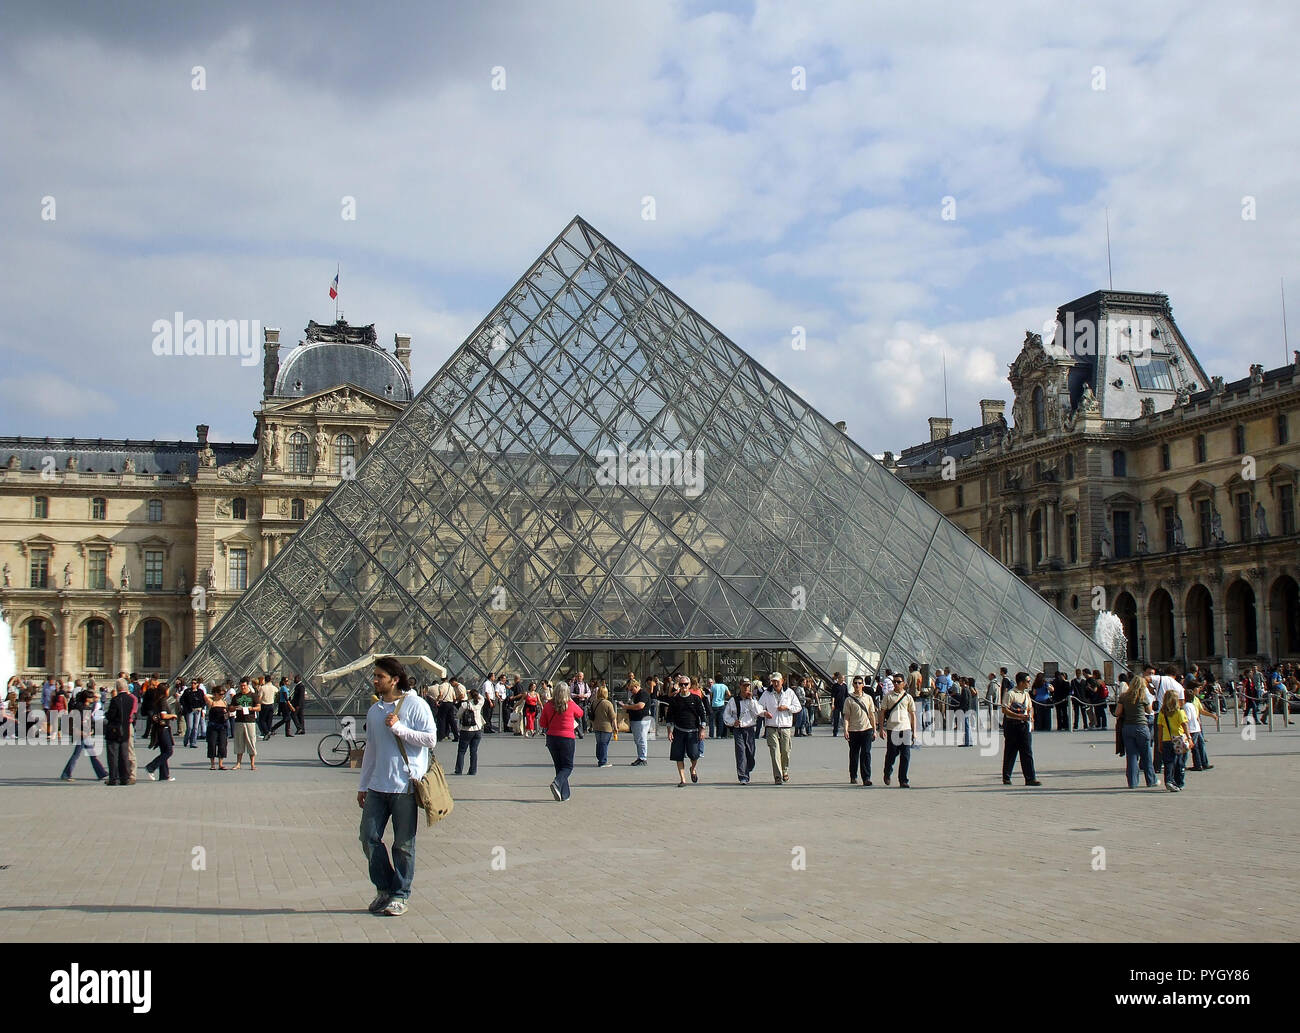 The main entrance to the Louvre museum is this famous, and stunning,  glass and metal pyramid in the main quadrant of the art gallery in Paris, France. Stock Photo